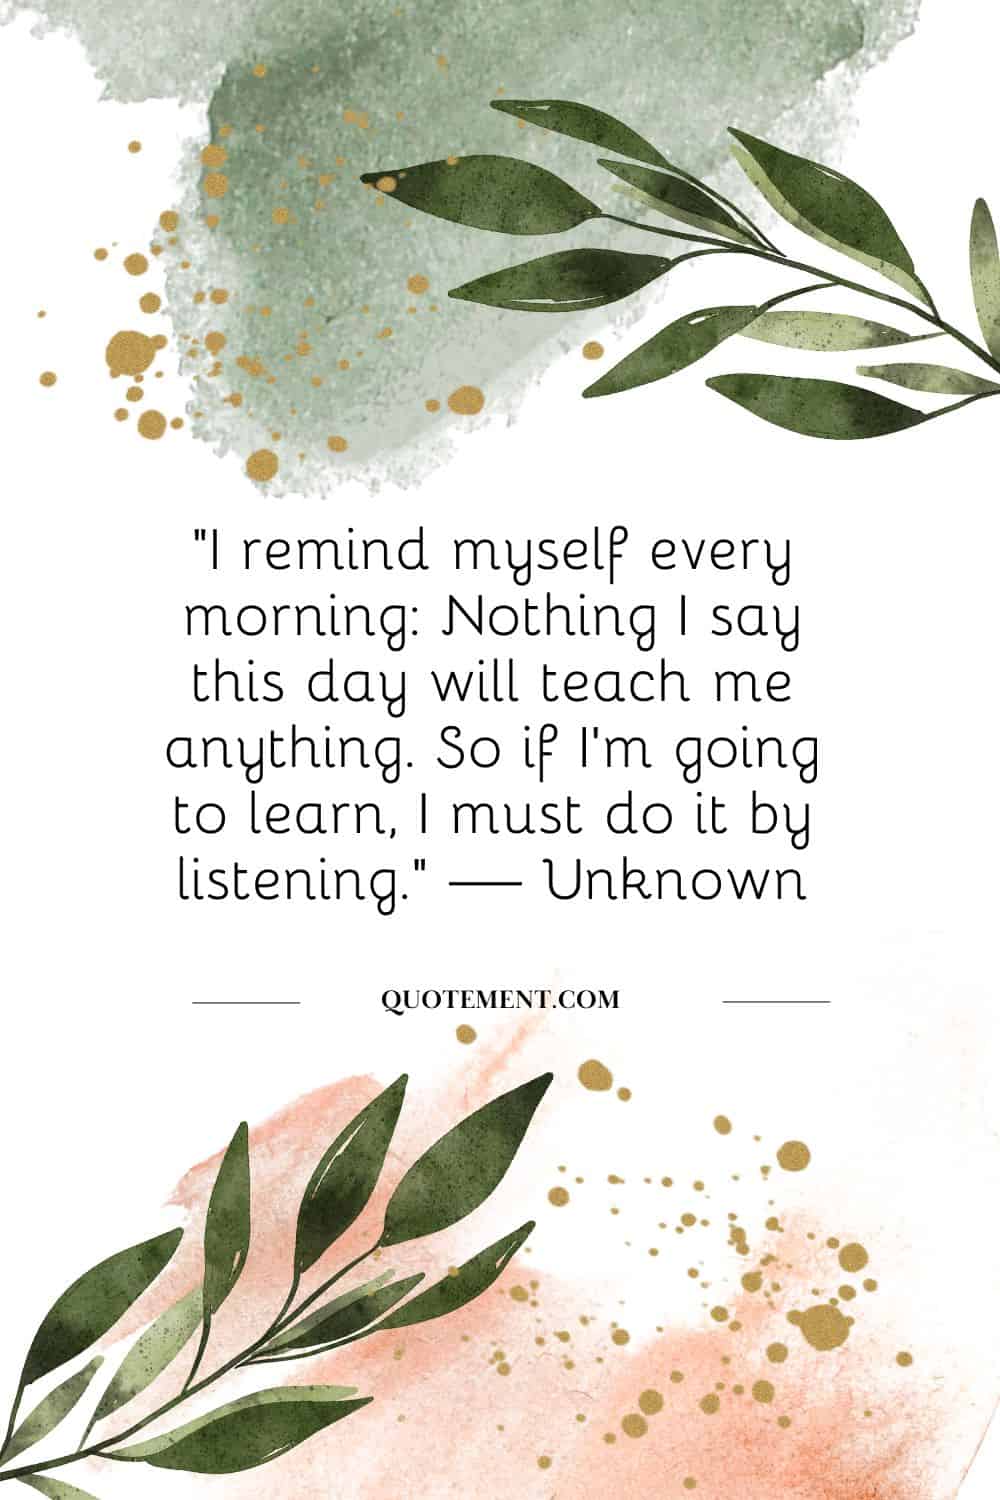 “I remind myself every morning Nothing I say this day will teach me anything. So if I’m going to learn, I must do it by listening.” — Unknown